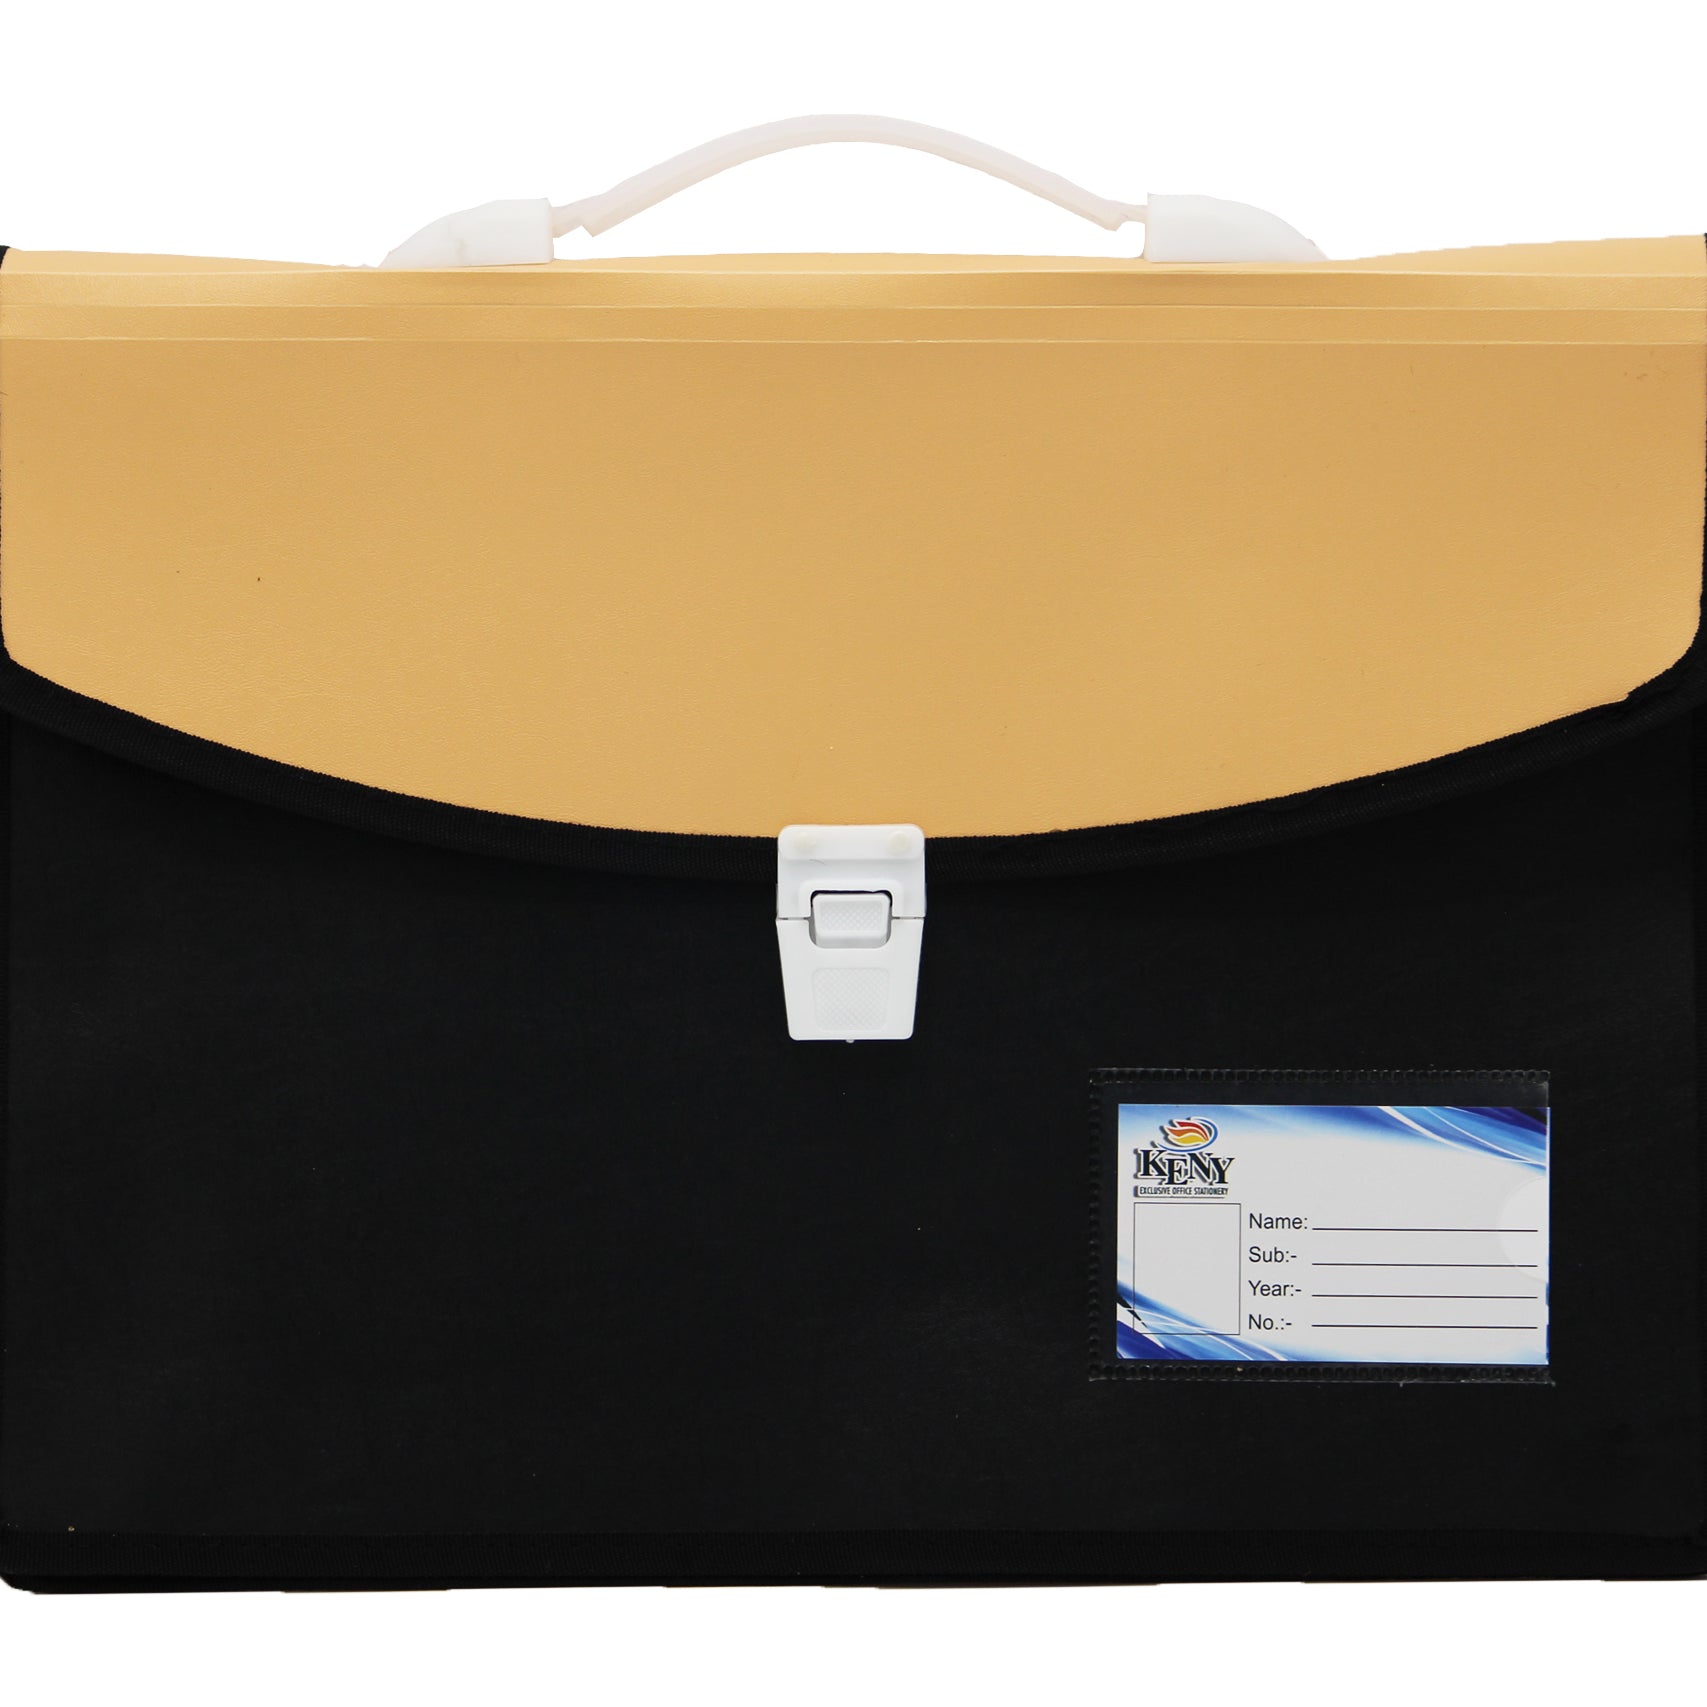 Keny Dual Colour Document Folder | With Handle & Lock |FC Size